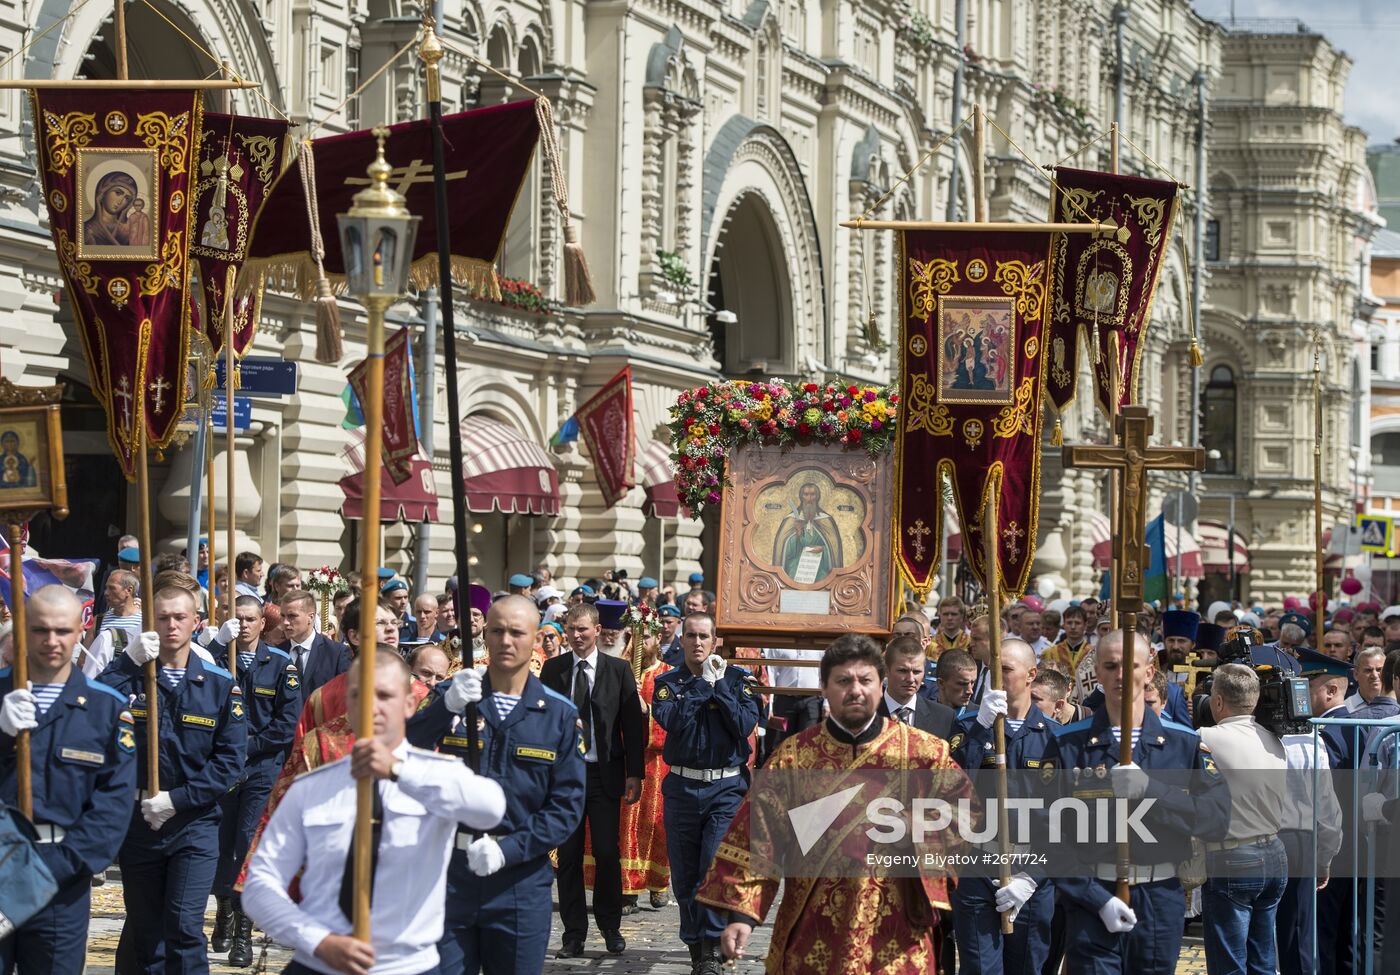 85th anniversary of Airborne Troops celebrated on Red Square